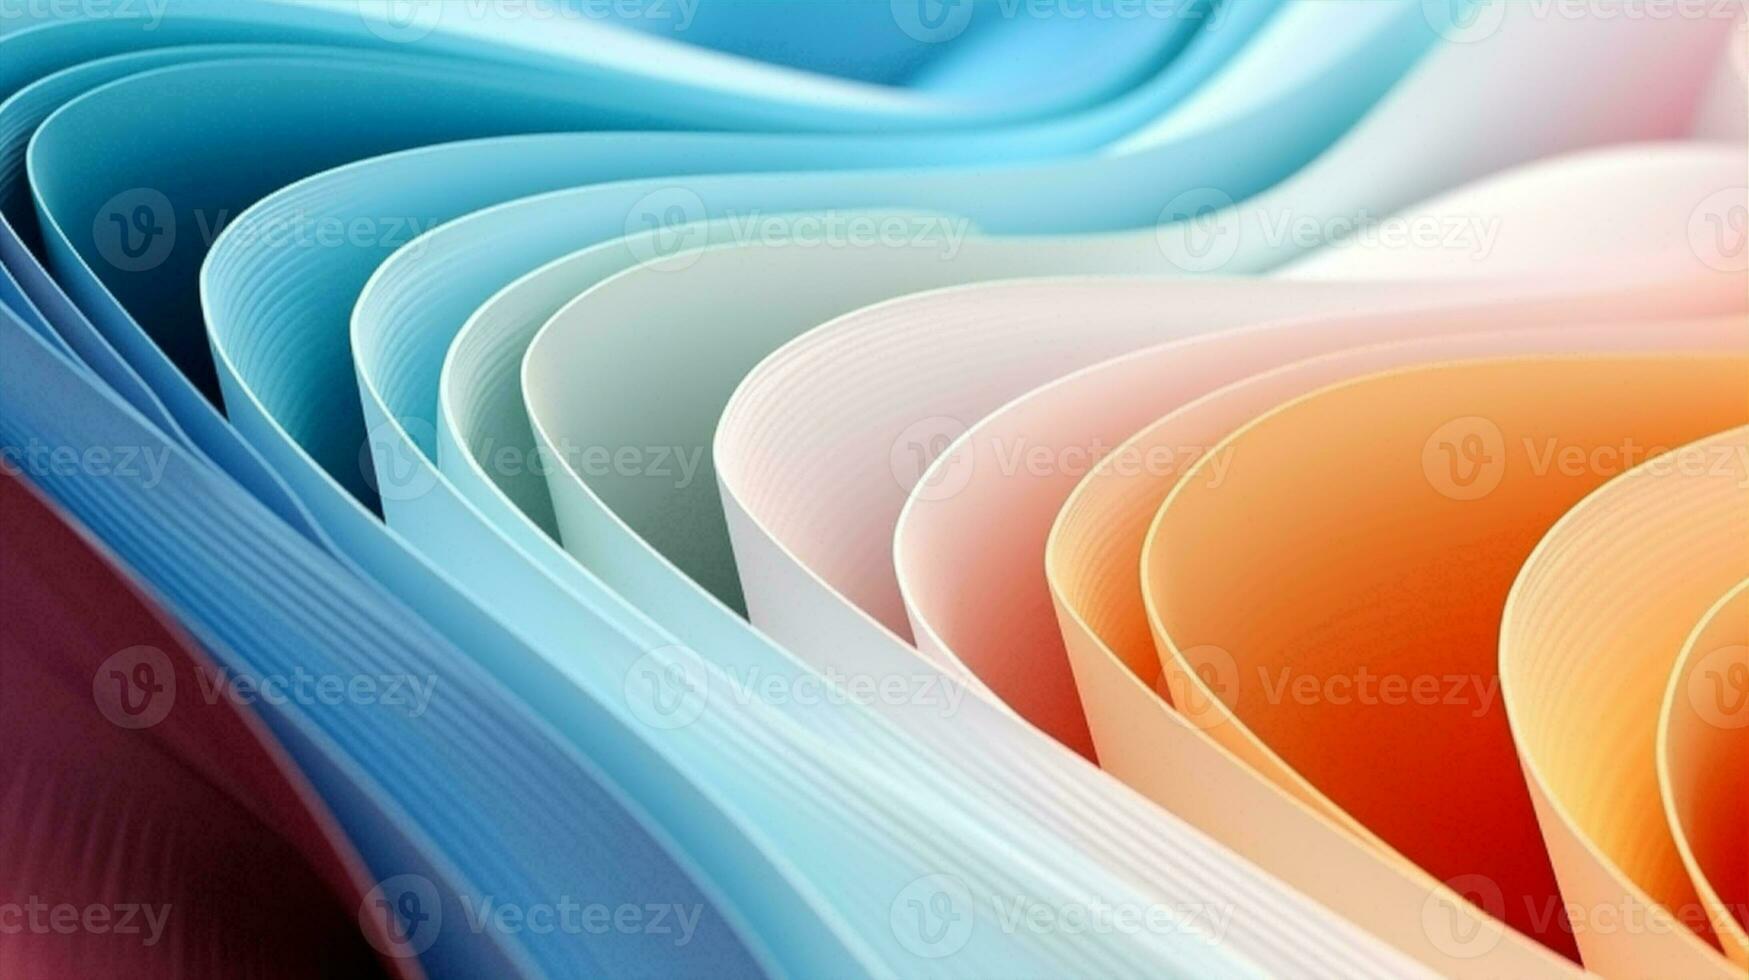 Abstract design art background photo